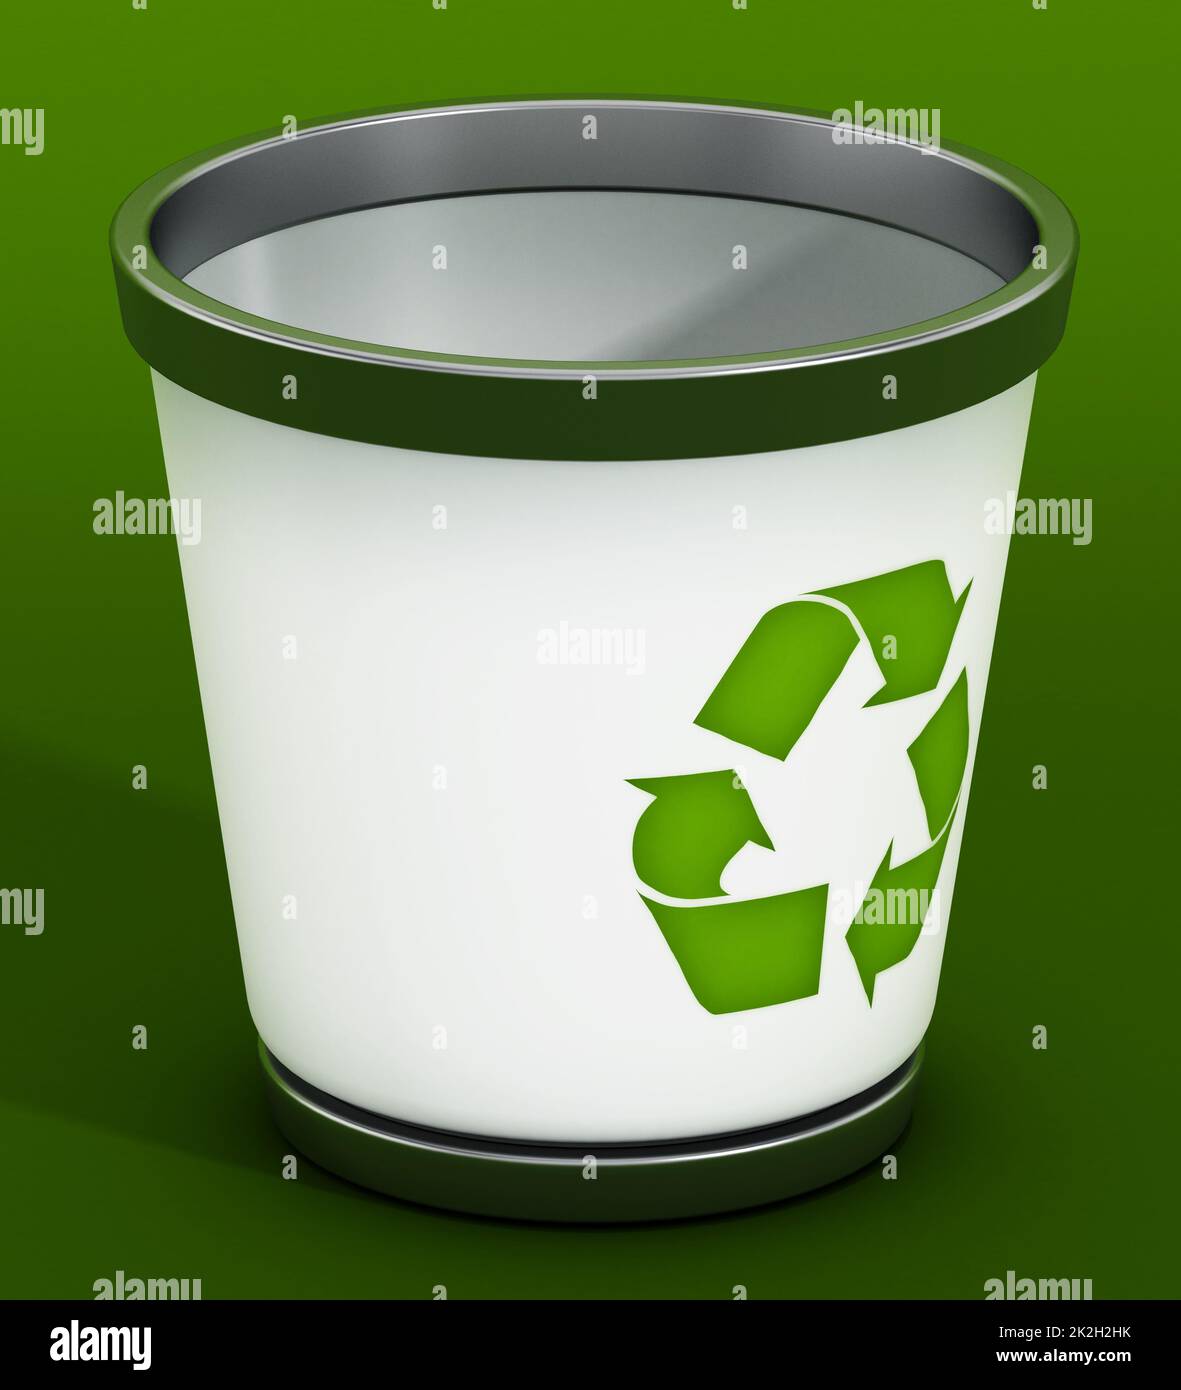 Recycle bin on green background Stock Photo